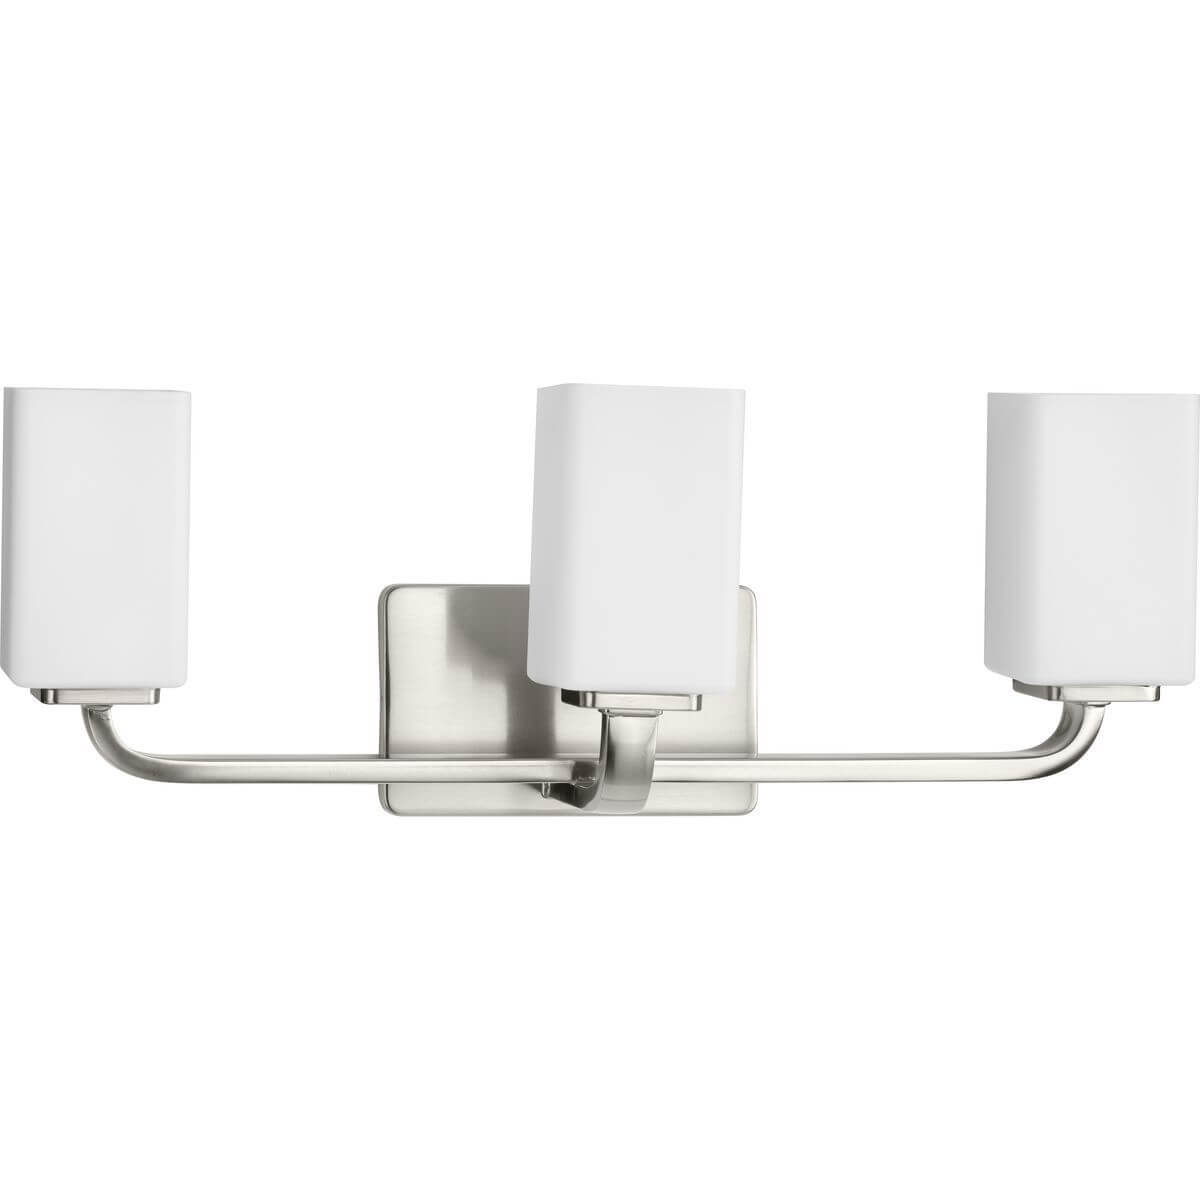 Progress Lighting Cowan 3 Light 24 inch Bath Vanity Light in Brushed Nickel with Etched Opal Glass P300370-009